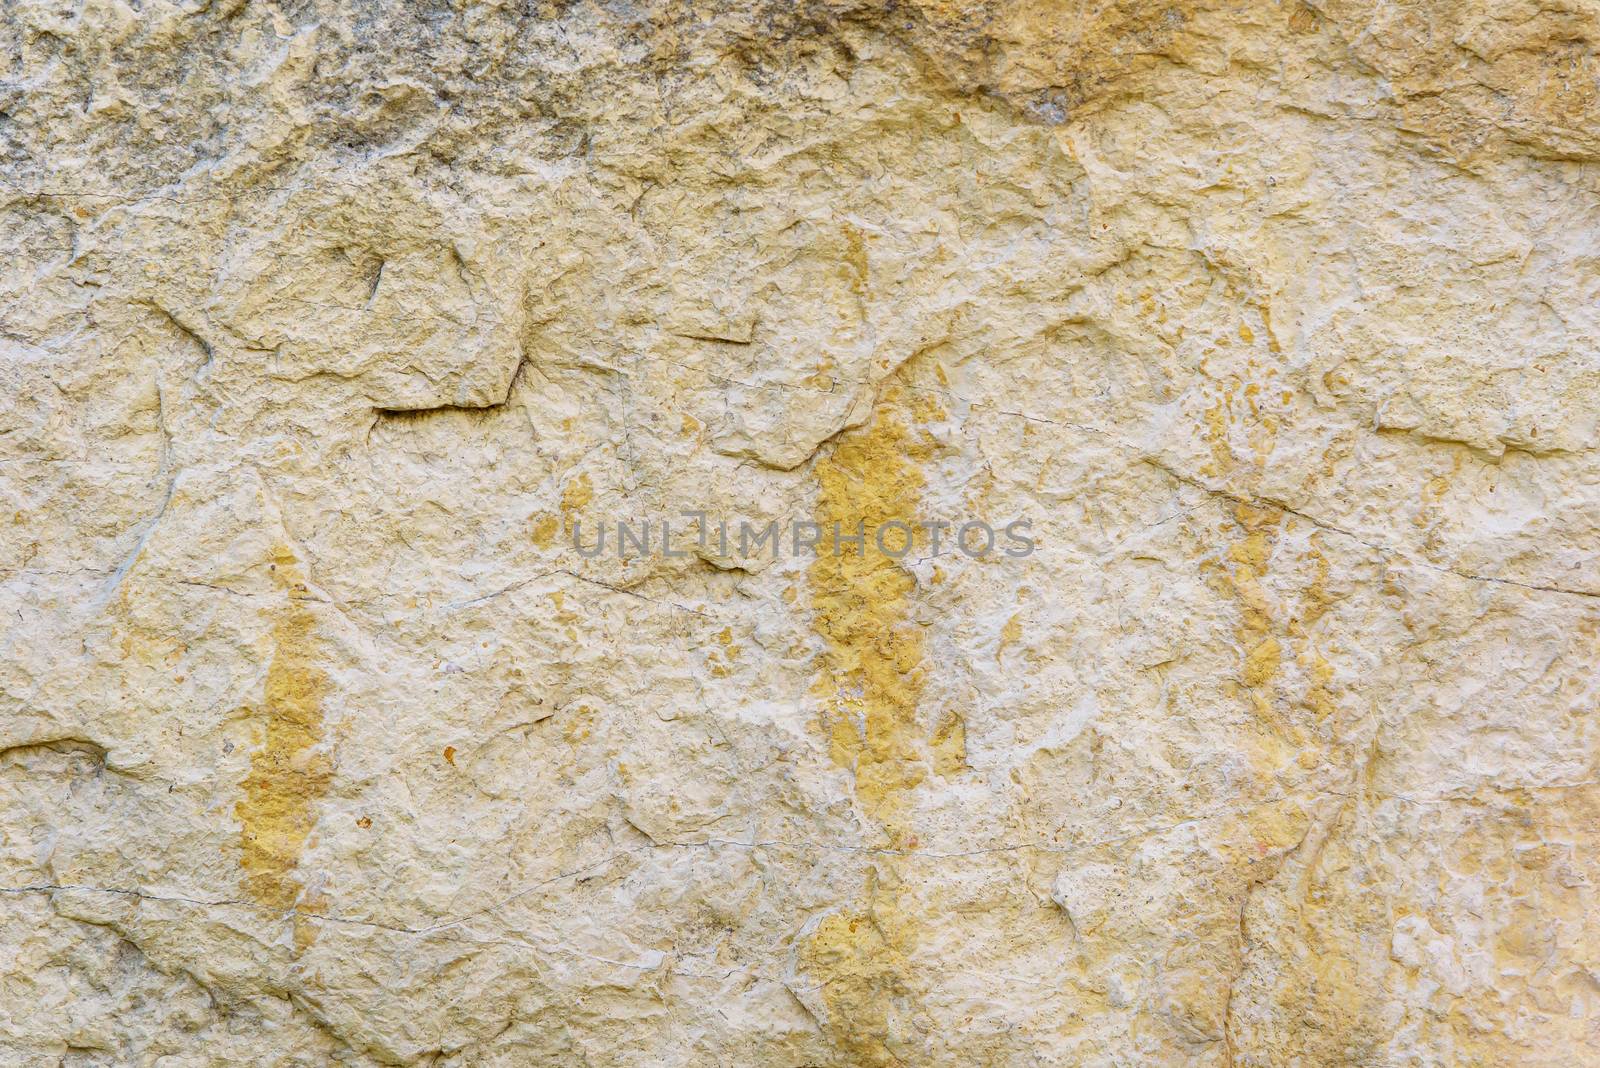 Detailed natural texture or background made of sandstone